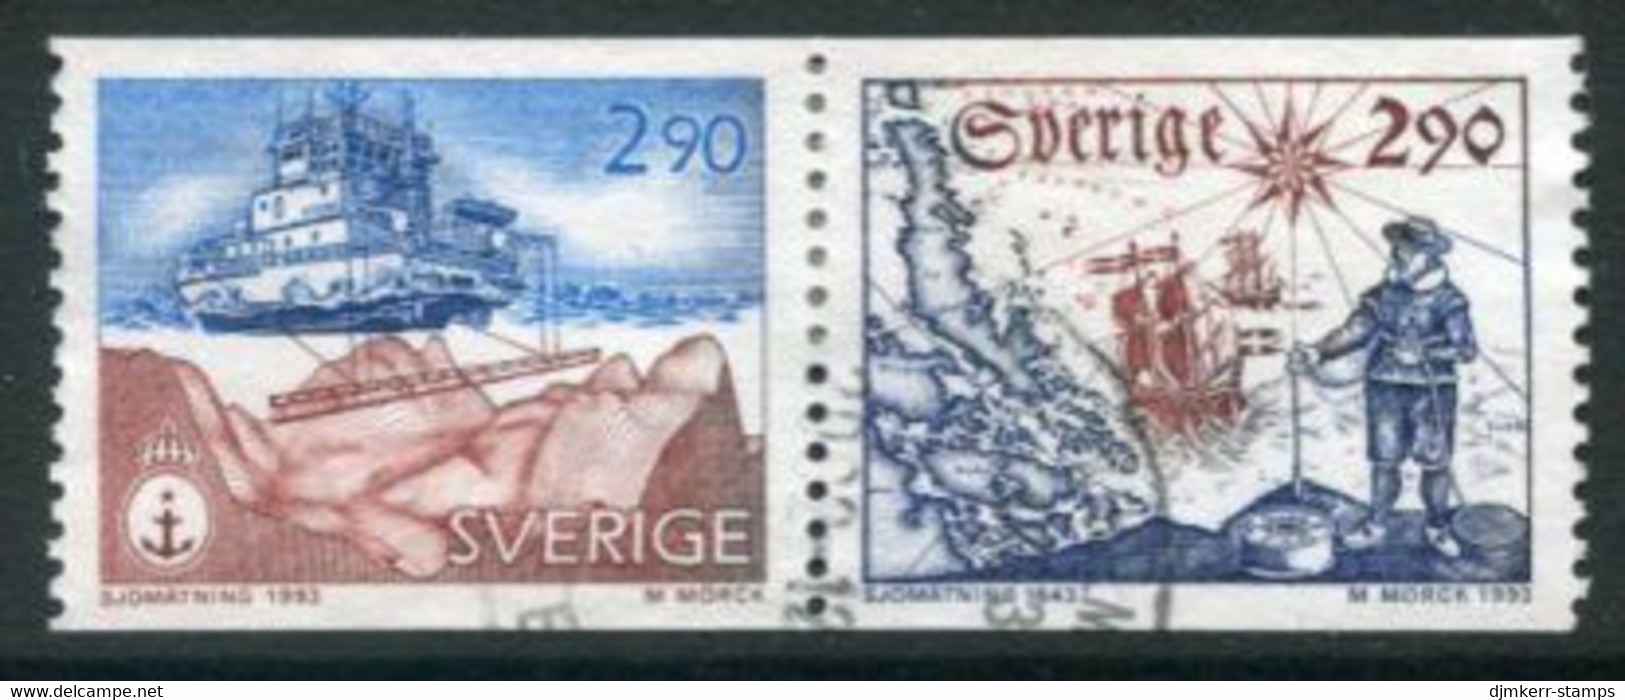 SWEDEN 1993 350th Anniversary Of Hydrography Used.   Michel 1797-98 - Gebraucht